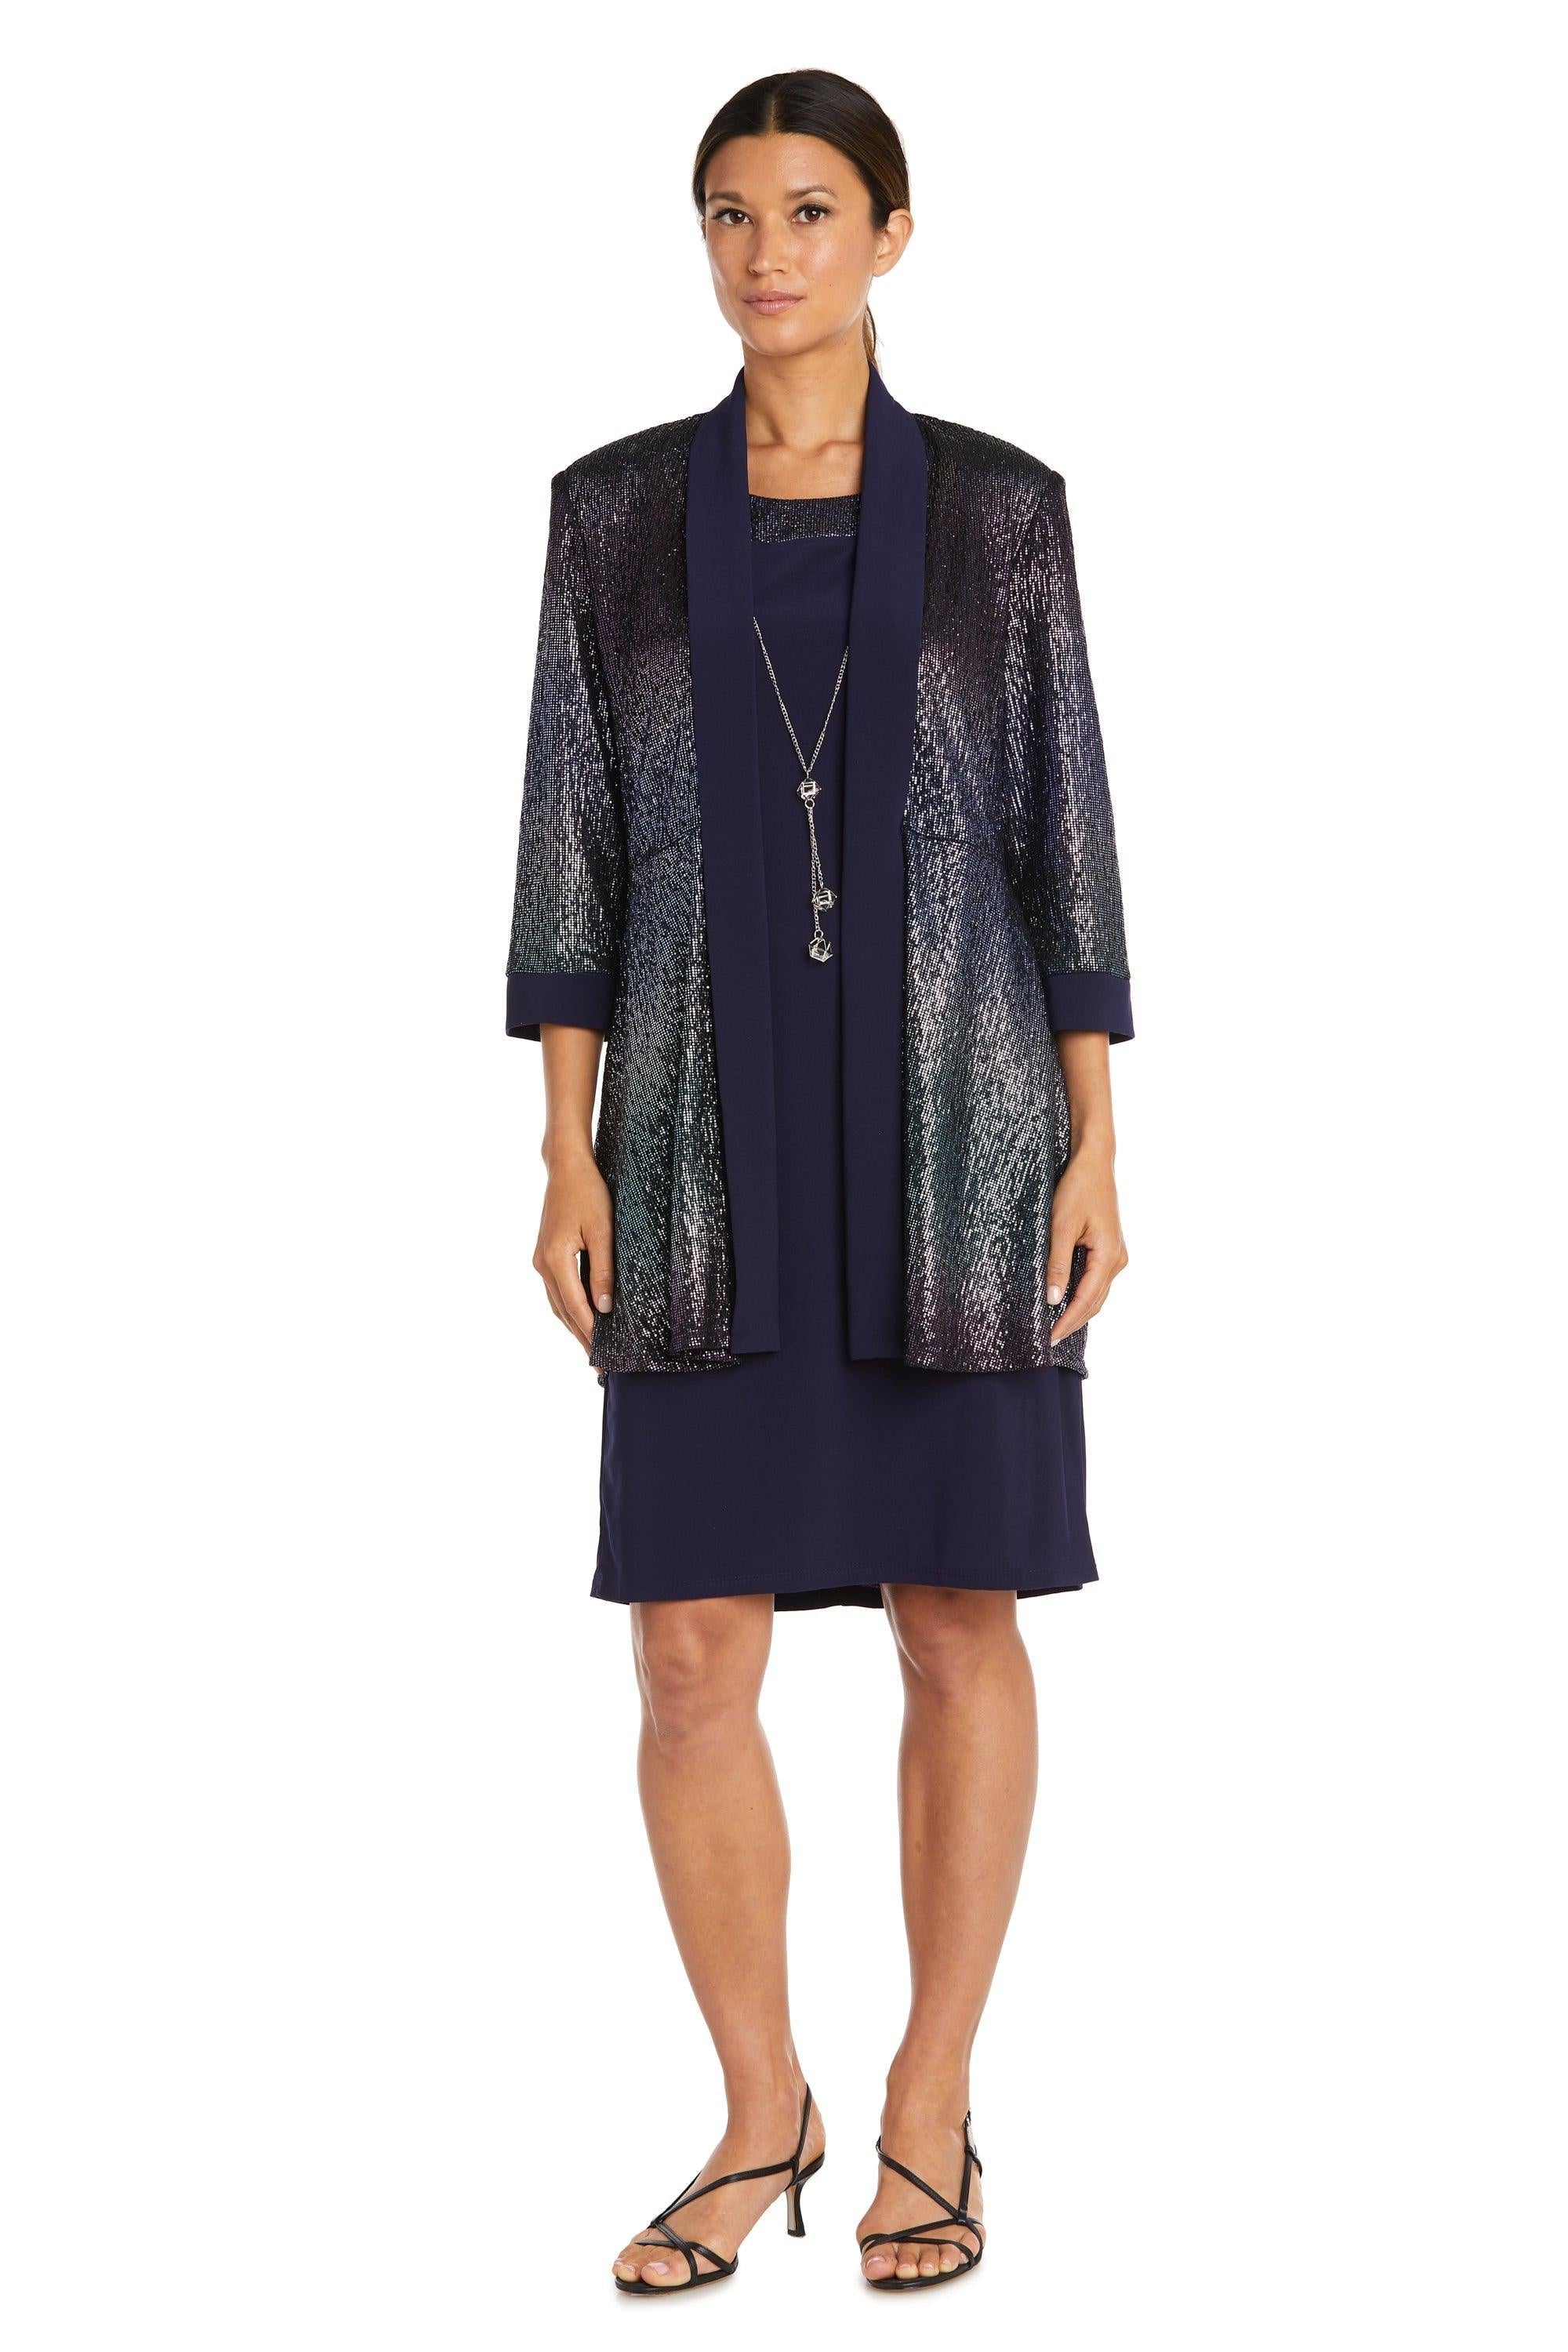 R&M Richards 9068 Short Two Piece Jacket Dress for $66.99 – The Dress ...